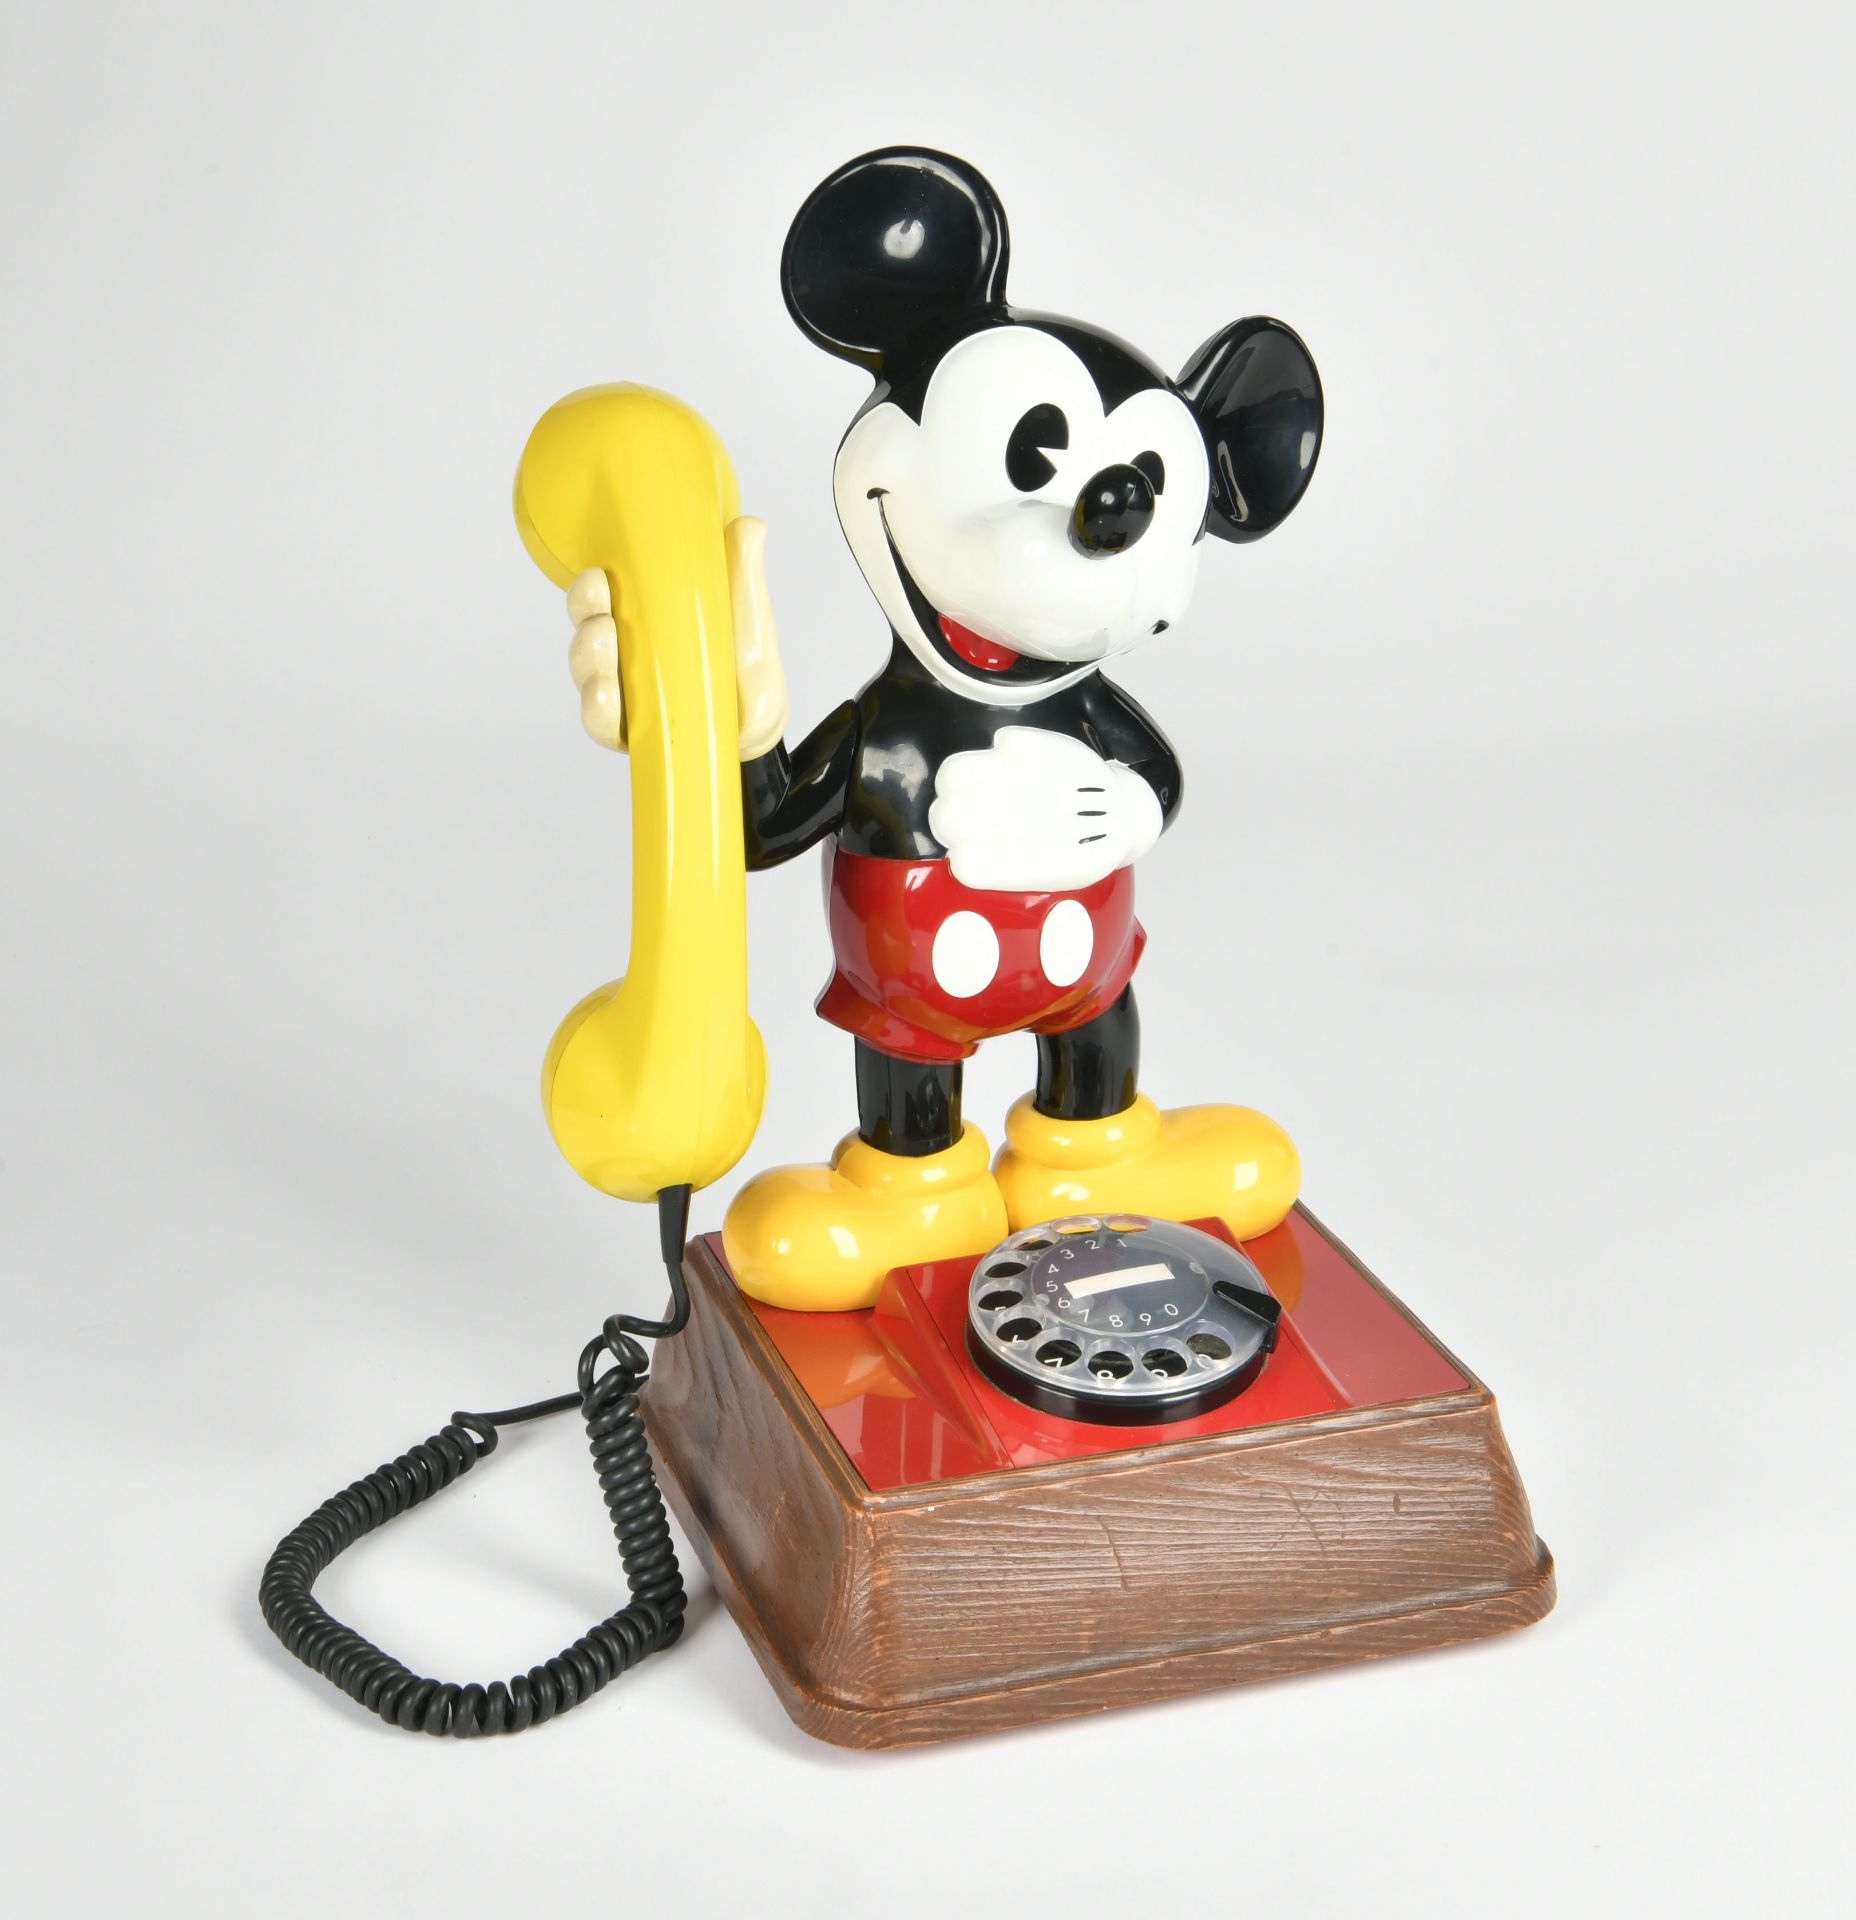 Mickey Mouse Telephone, W.-Germany, plastic, with dial plate, C 1-2